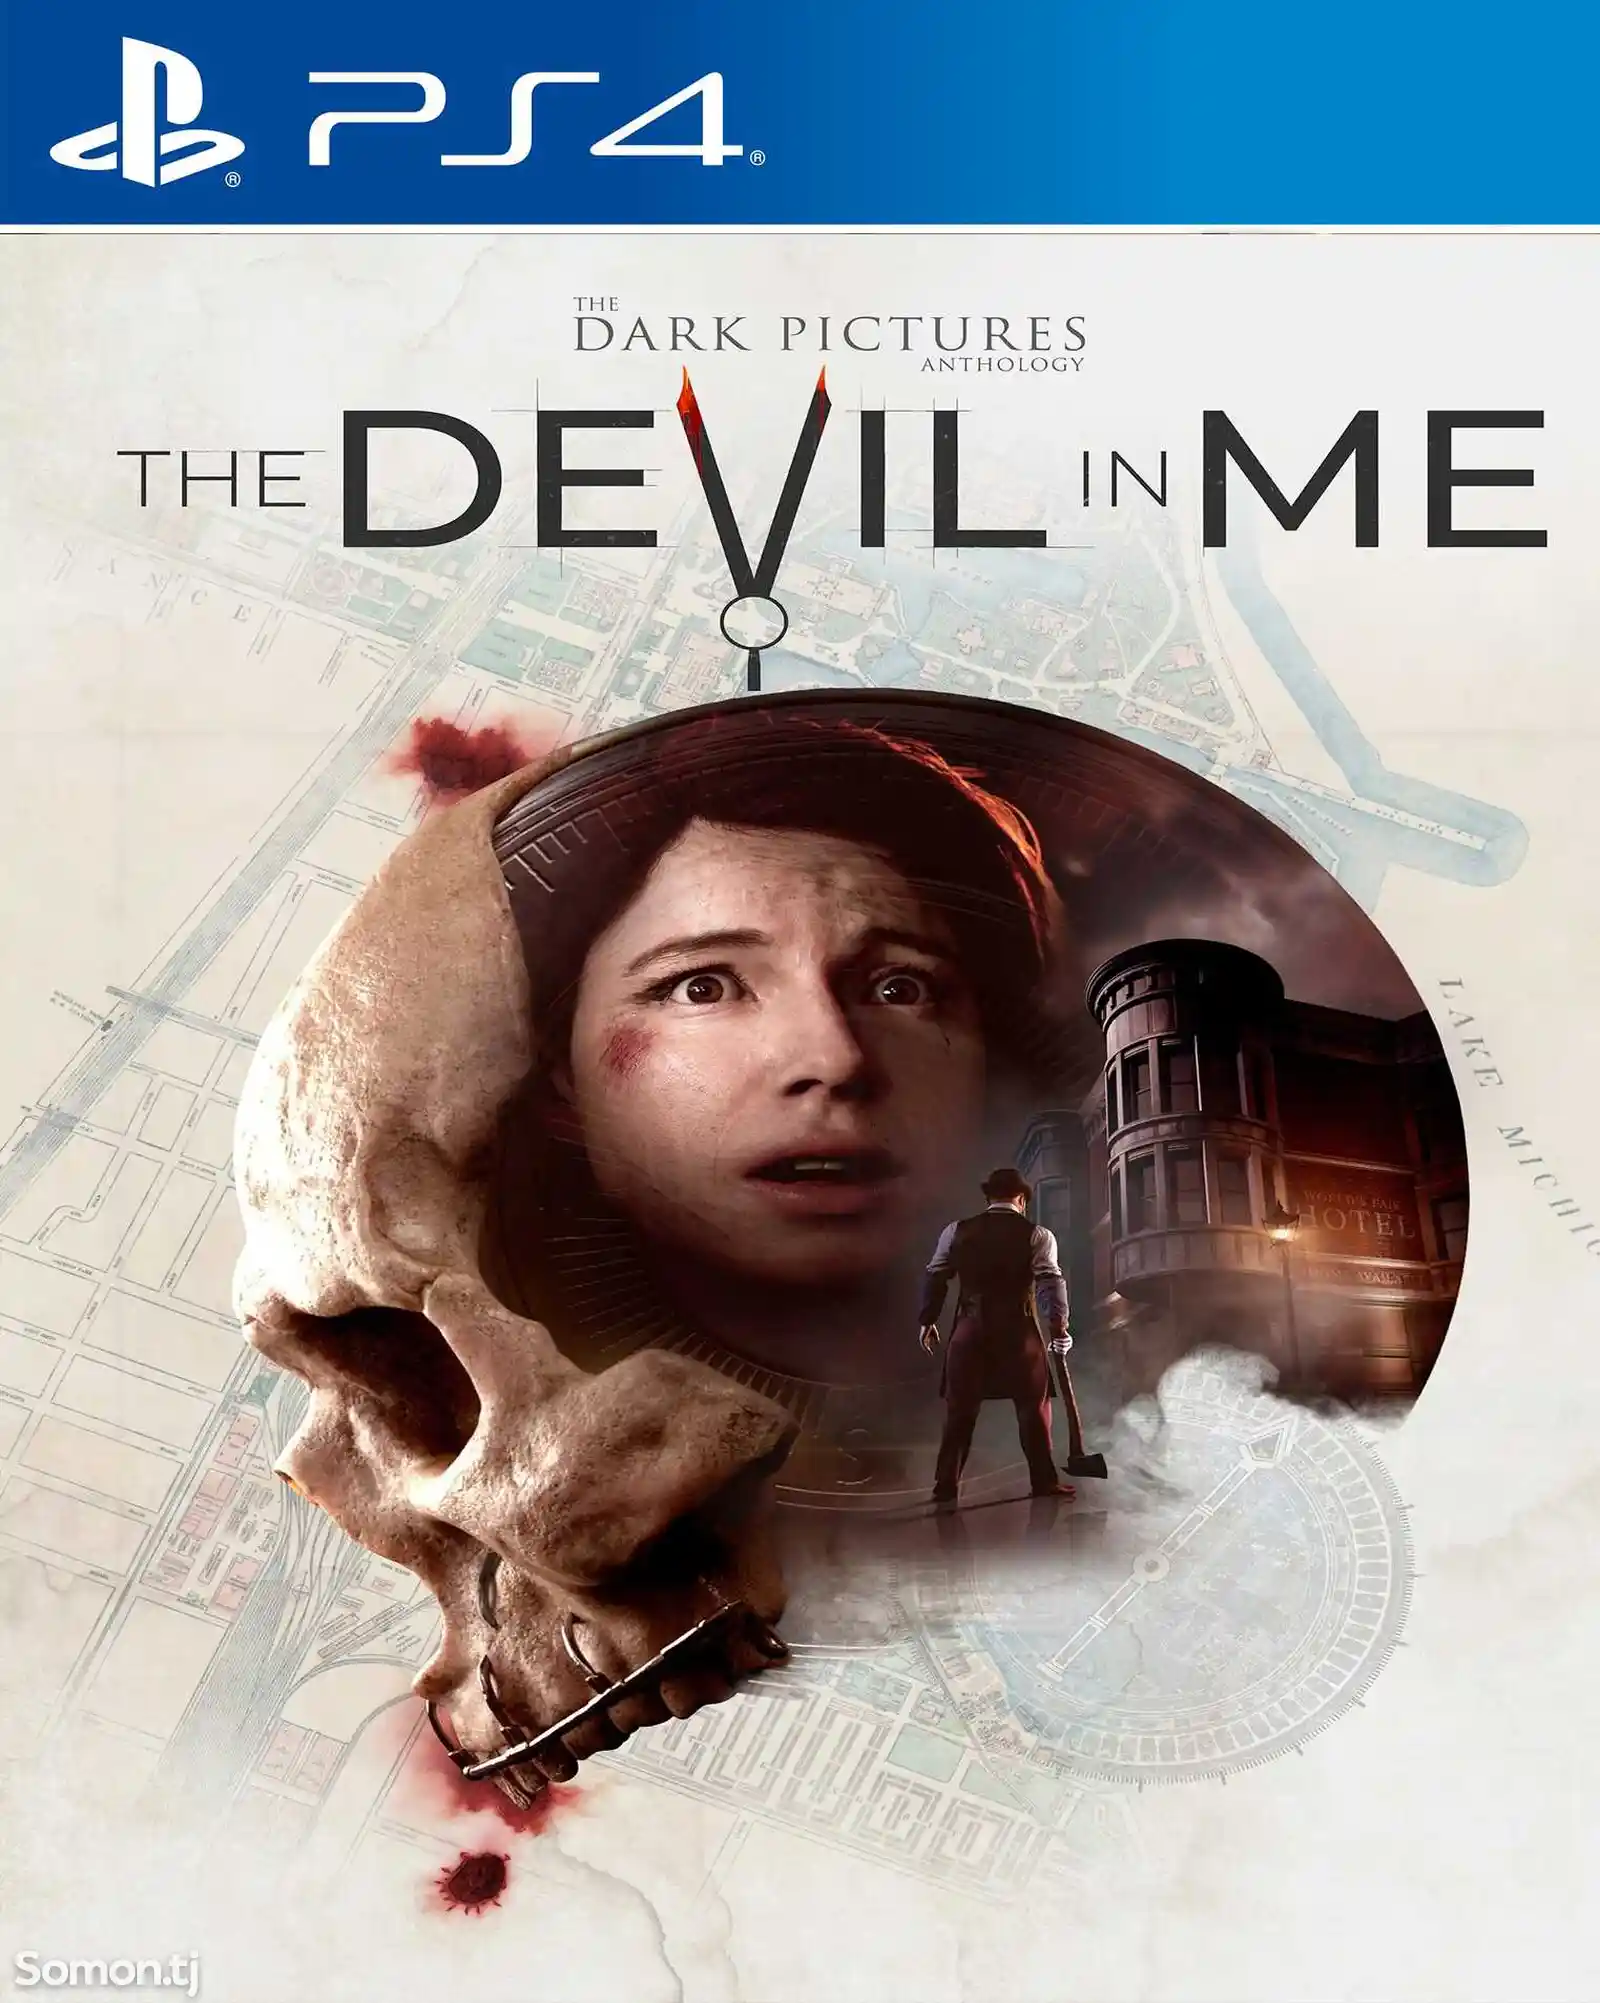 Игра The dark pictures anthology the devil in me для PS-4 / 5.05 / 6.72 / 9.00 /-1